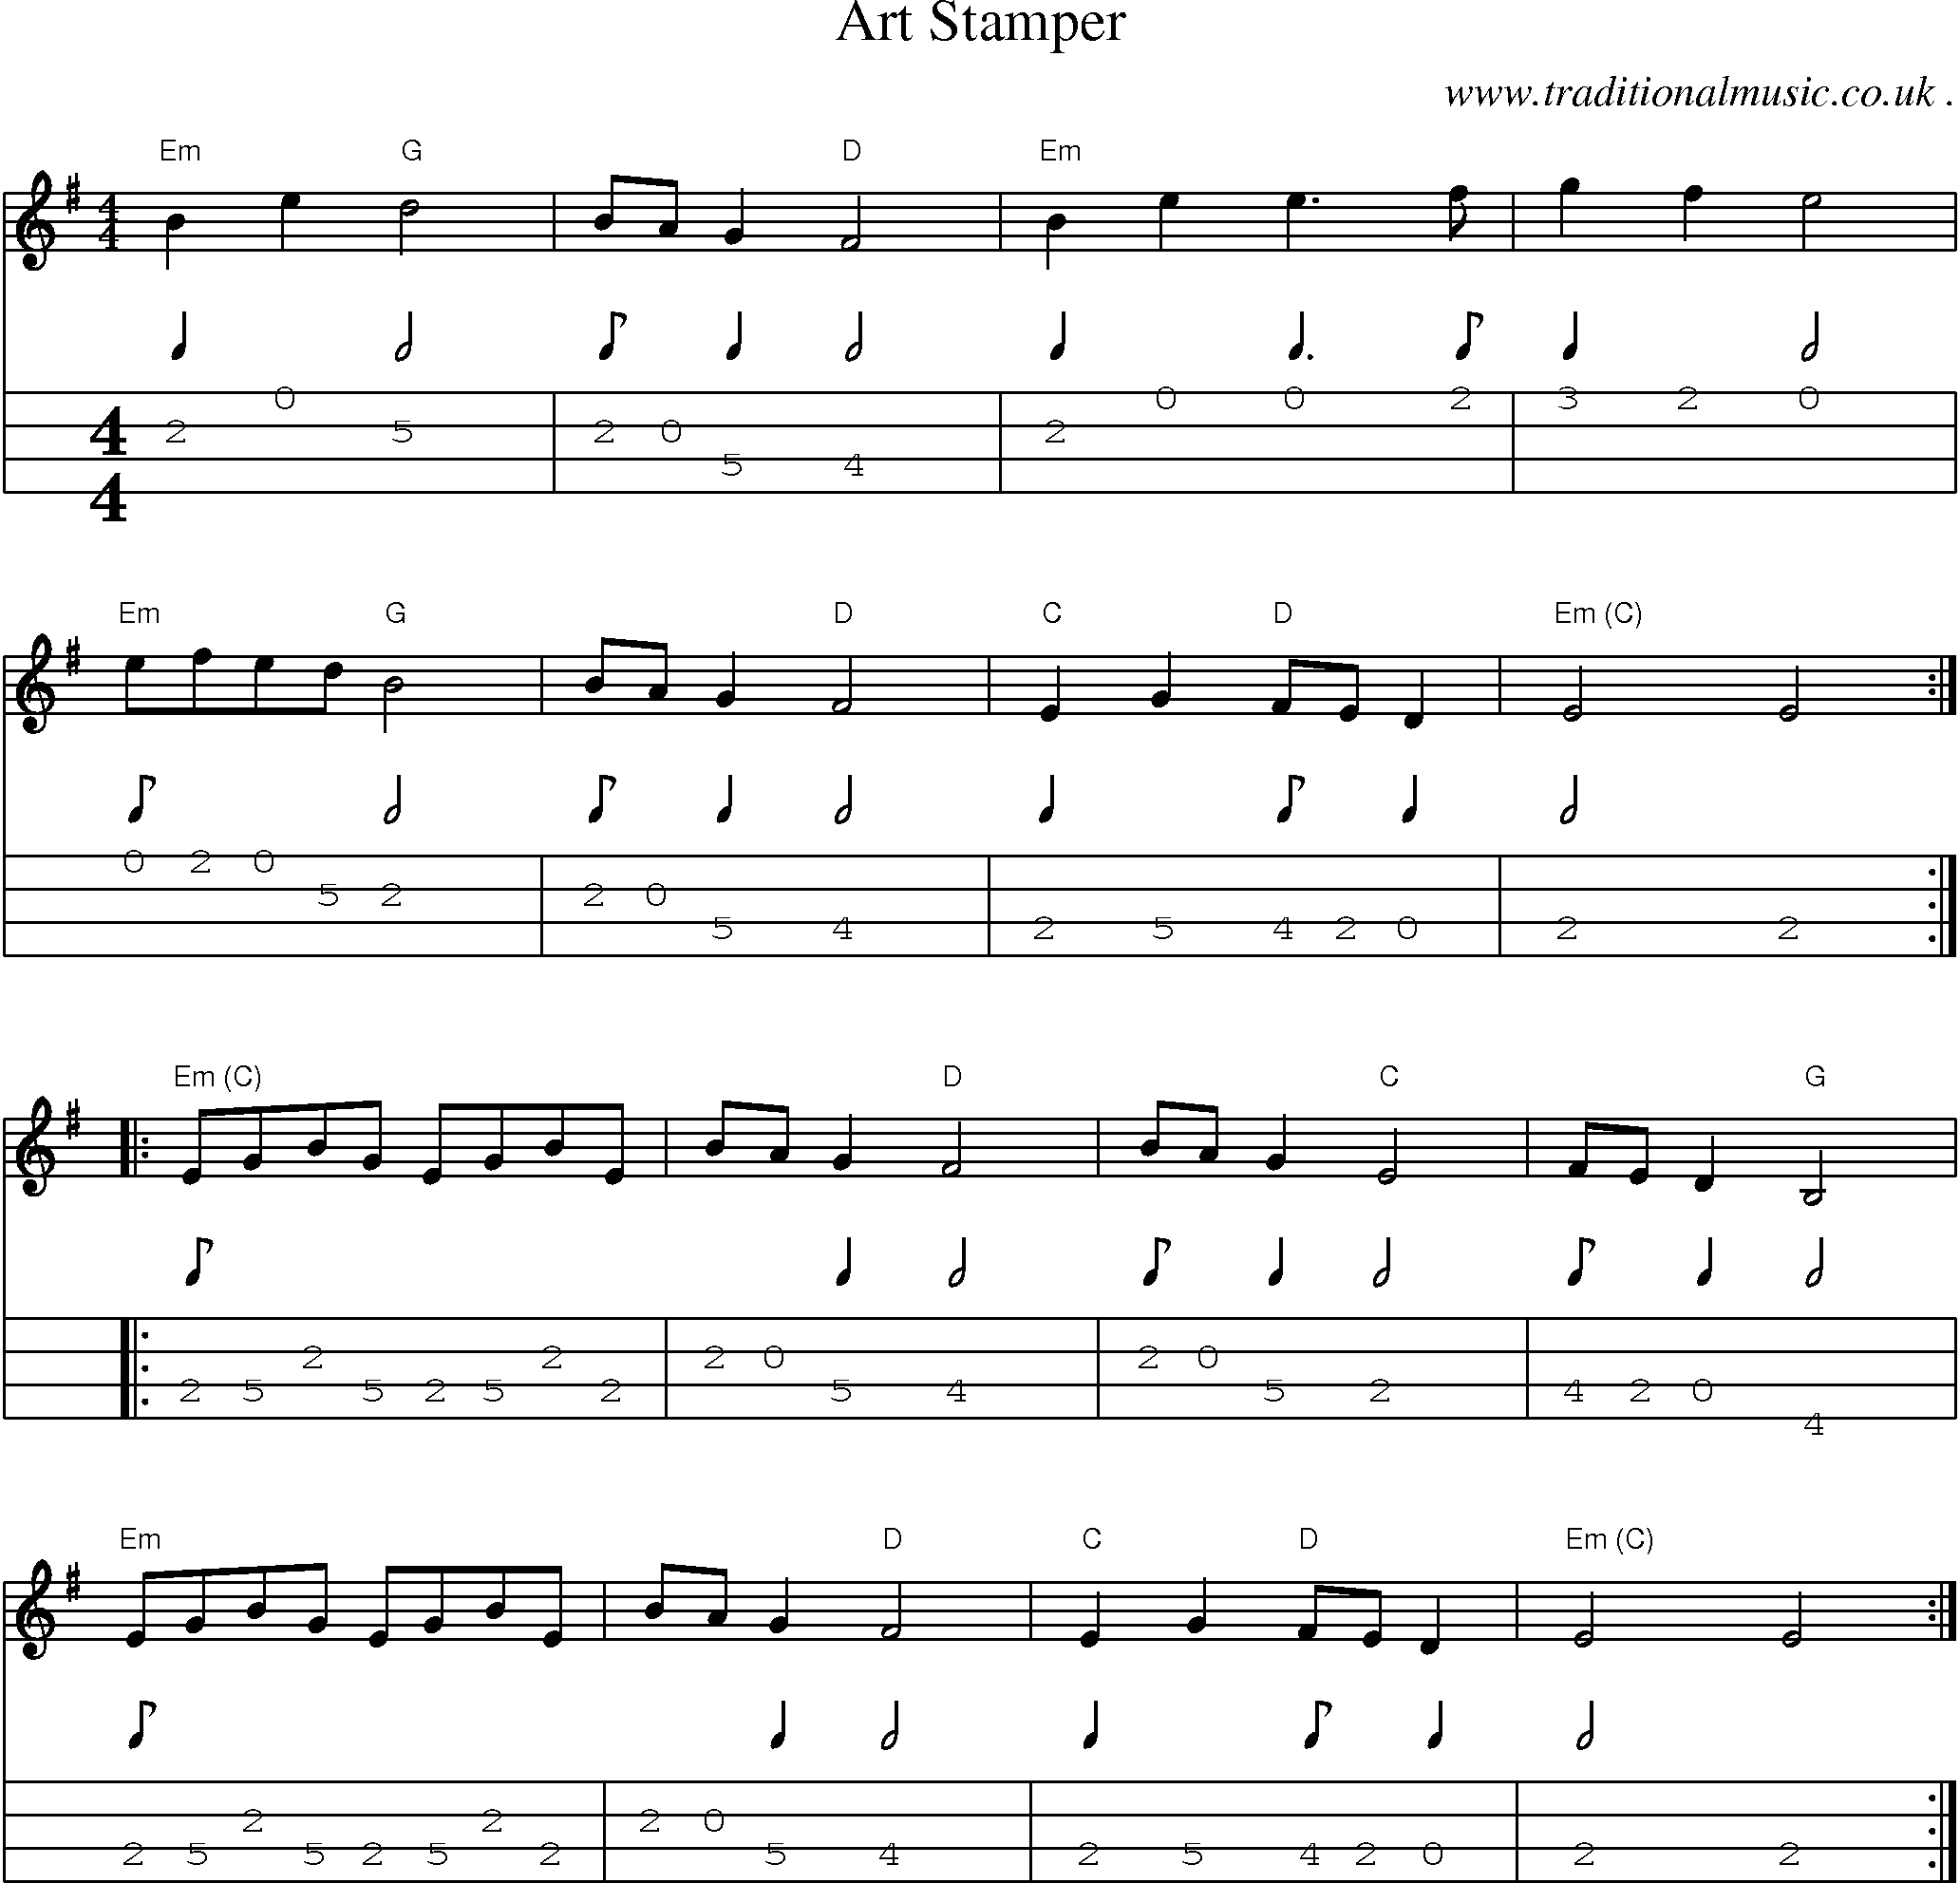 Music Score and Mandolin Tabs for Art Stamper